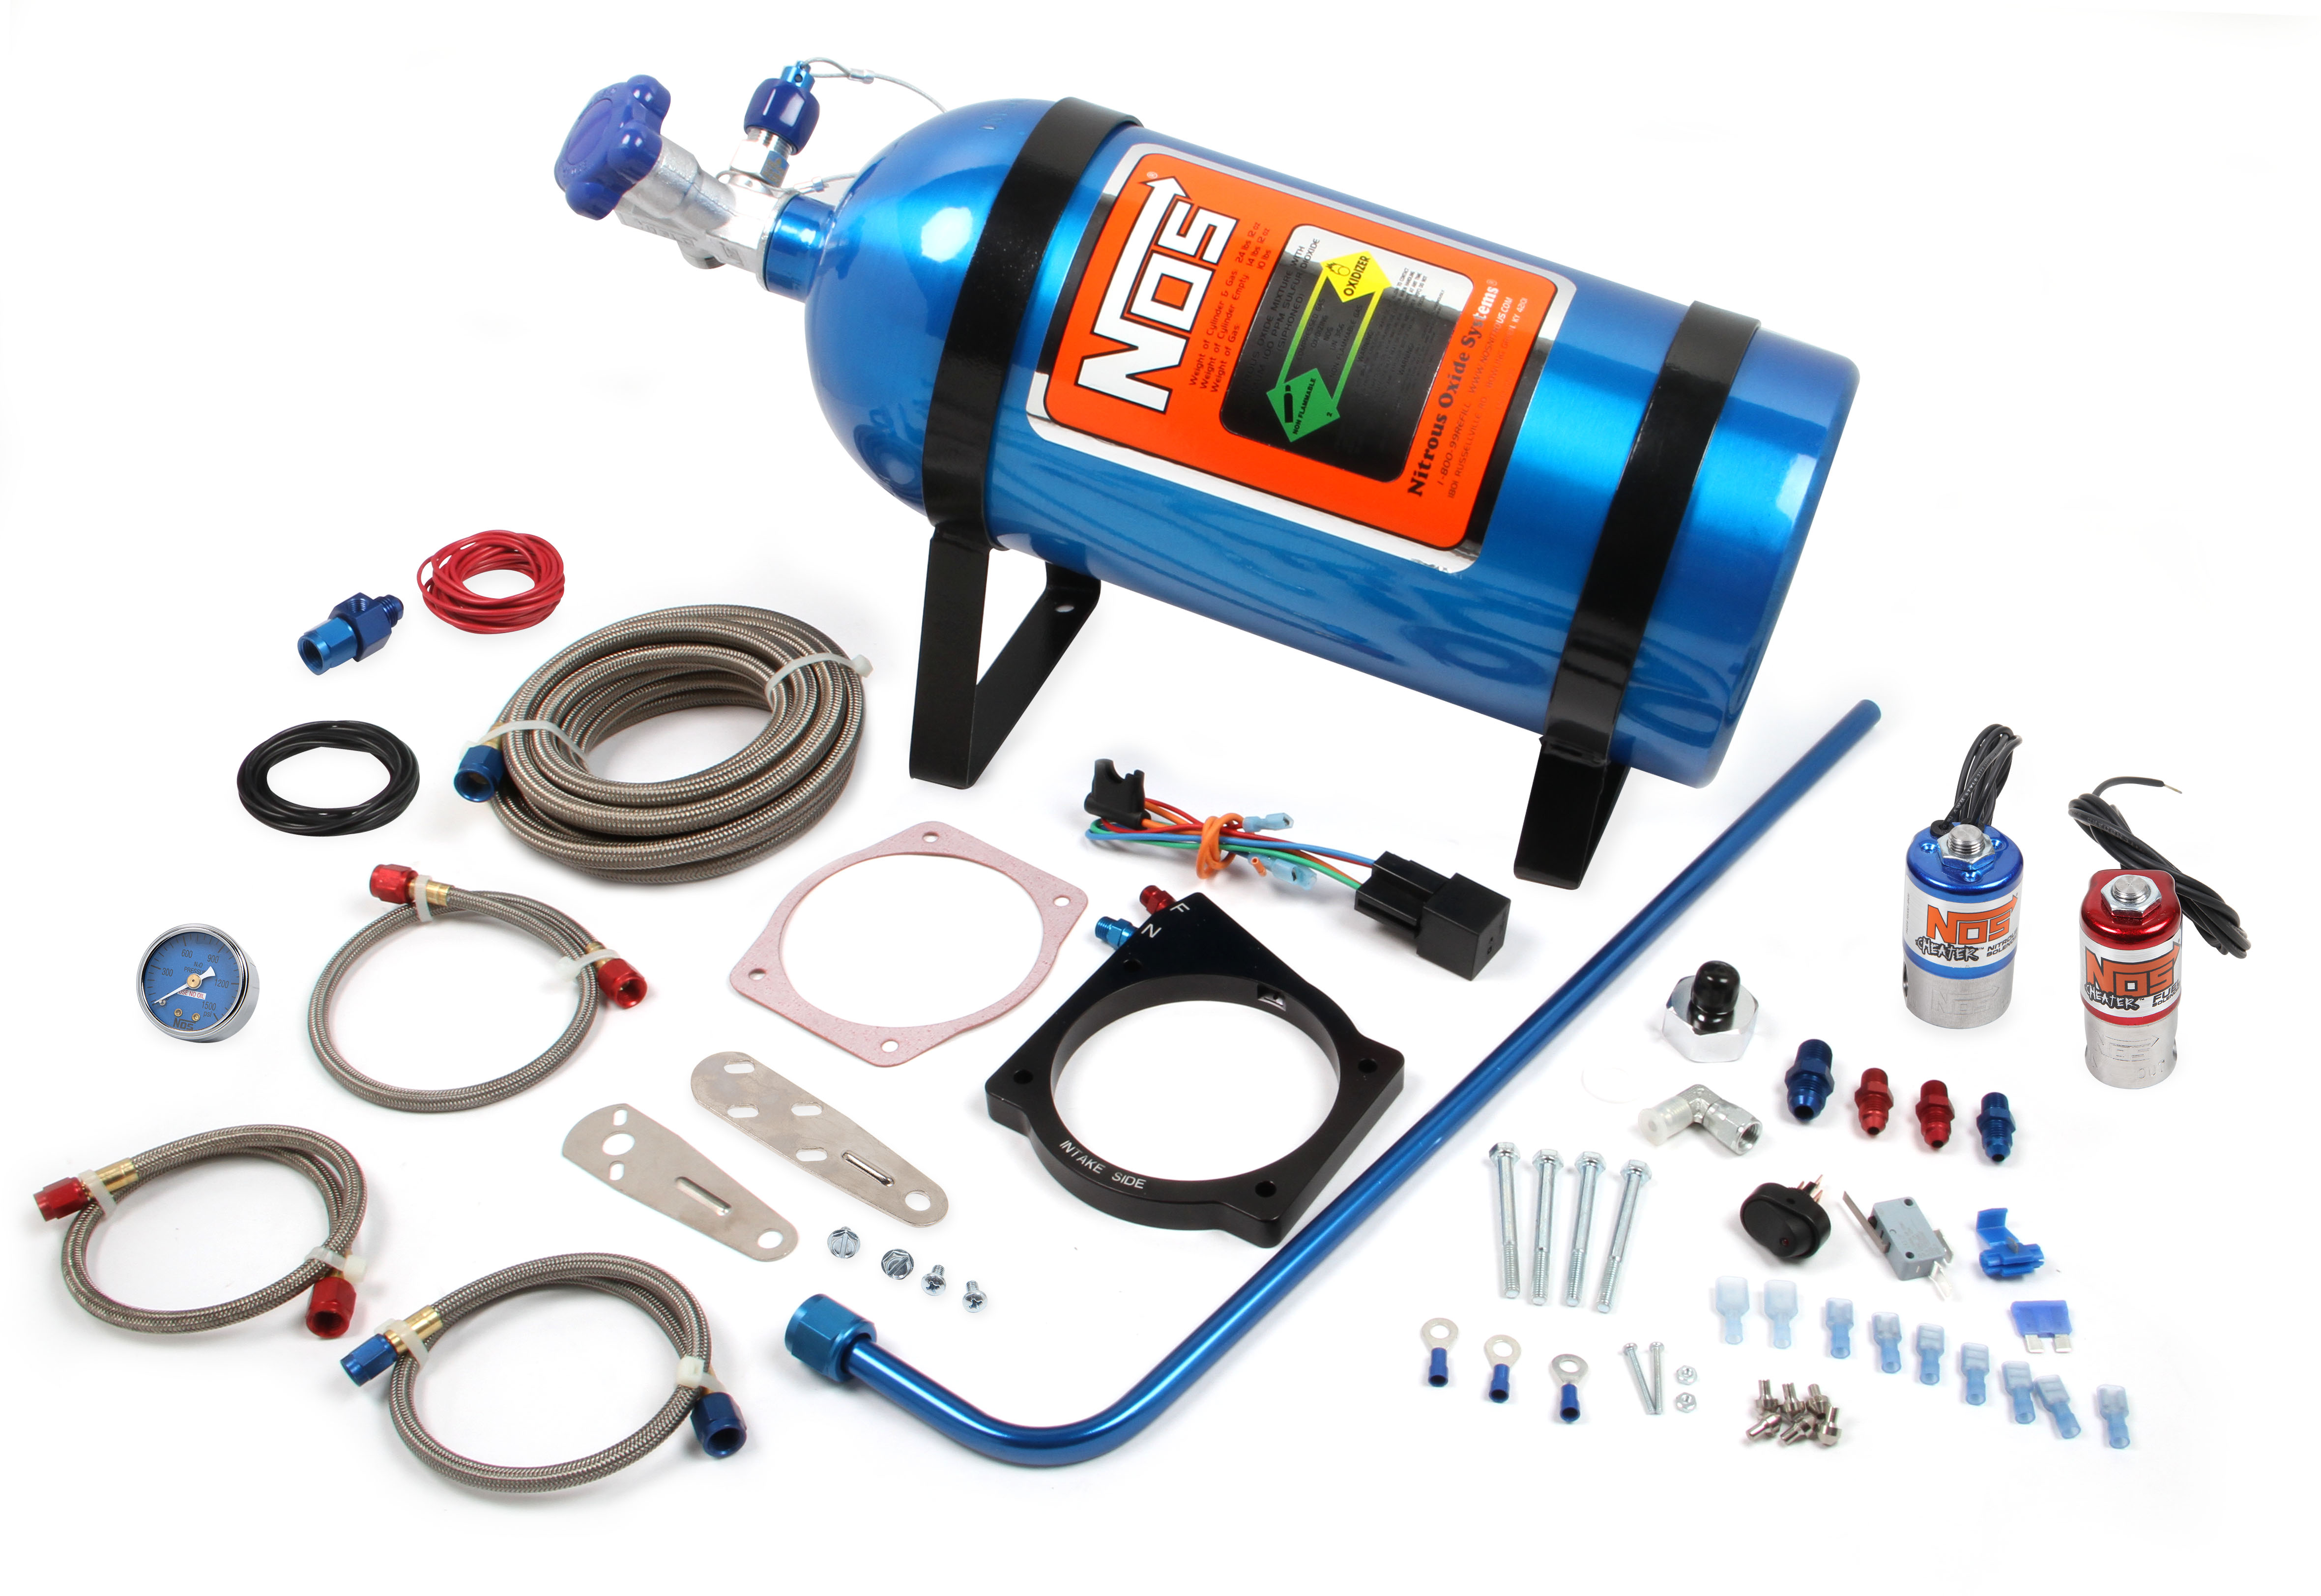 GM LS Series NOS 105mm 4 Bolt Nitrous Plate System w/10lb Bottle - For Cable Throttlebody